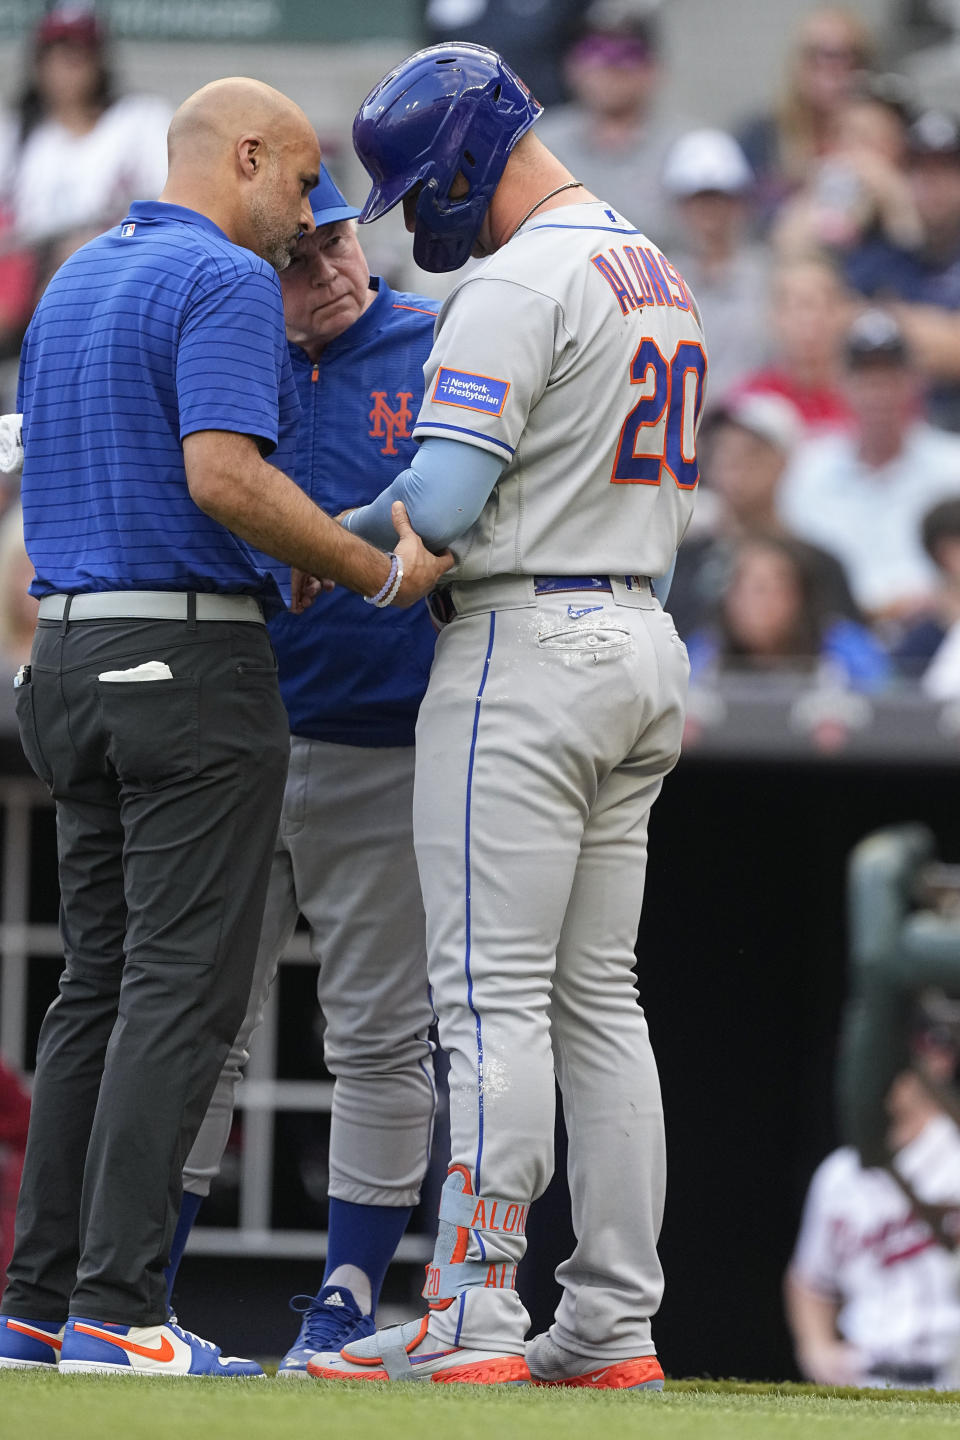 A member of the New York Mets training staff checks first baseman Pete Alonso's (20) hand after he was hit by a pitch from Atlanta Braves starting pitcher Charlie Morton (50) in the first inning a baseball game against the Atlanta Braves, Wednesday, June 7, 2023, in Atlanta. (AP Photo/John Bazemore)